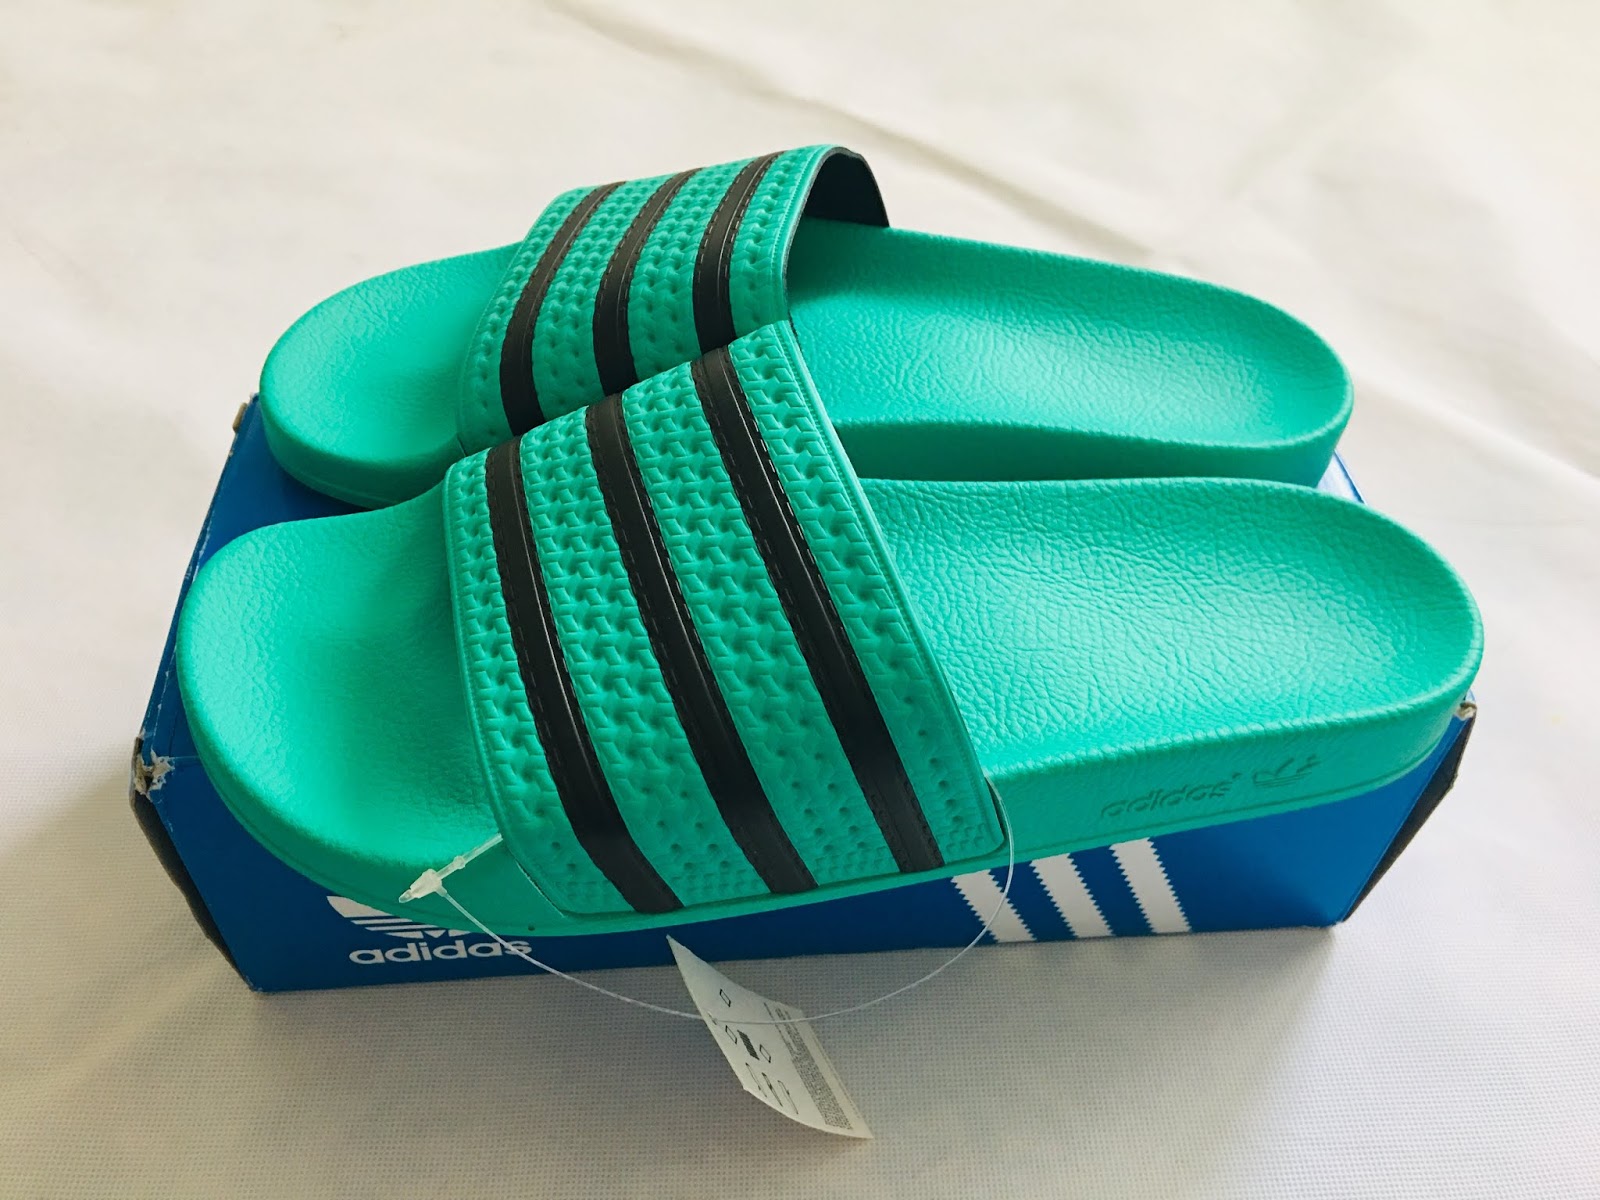 streetwear, skateboarding and brands photo and reviews blog: Adidas Adilette Slides CQ3100 Review